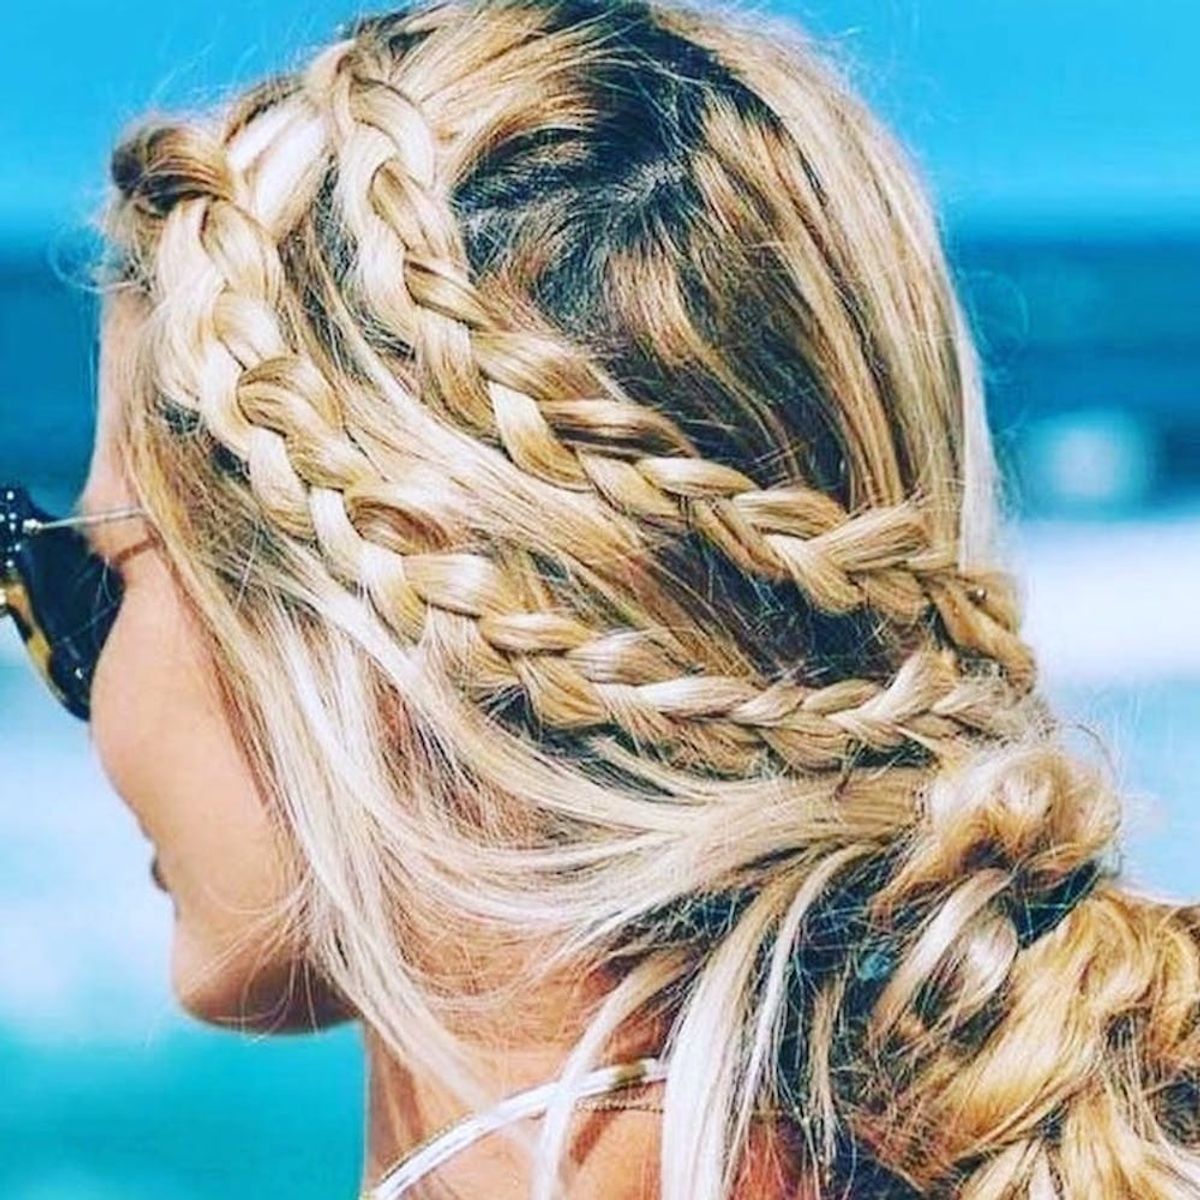 Messy Braids Are Everything We Want in a Summer Hairstyle